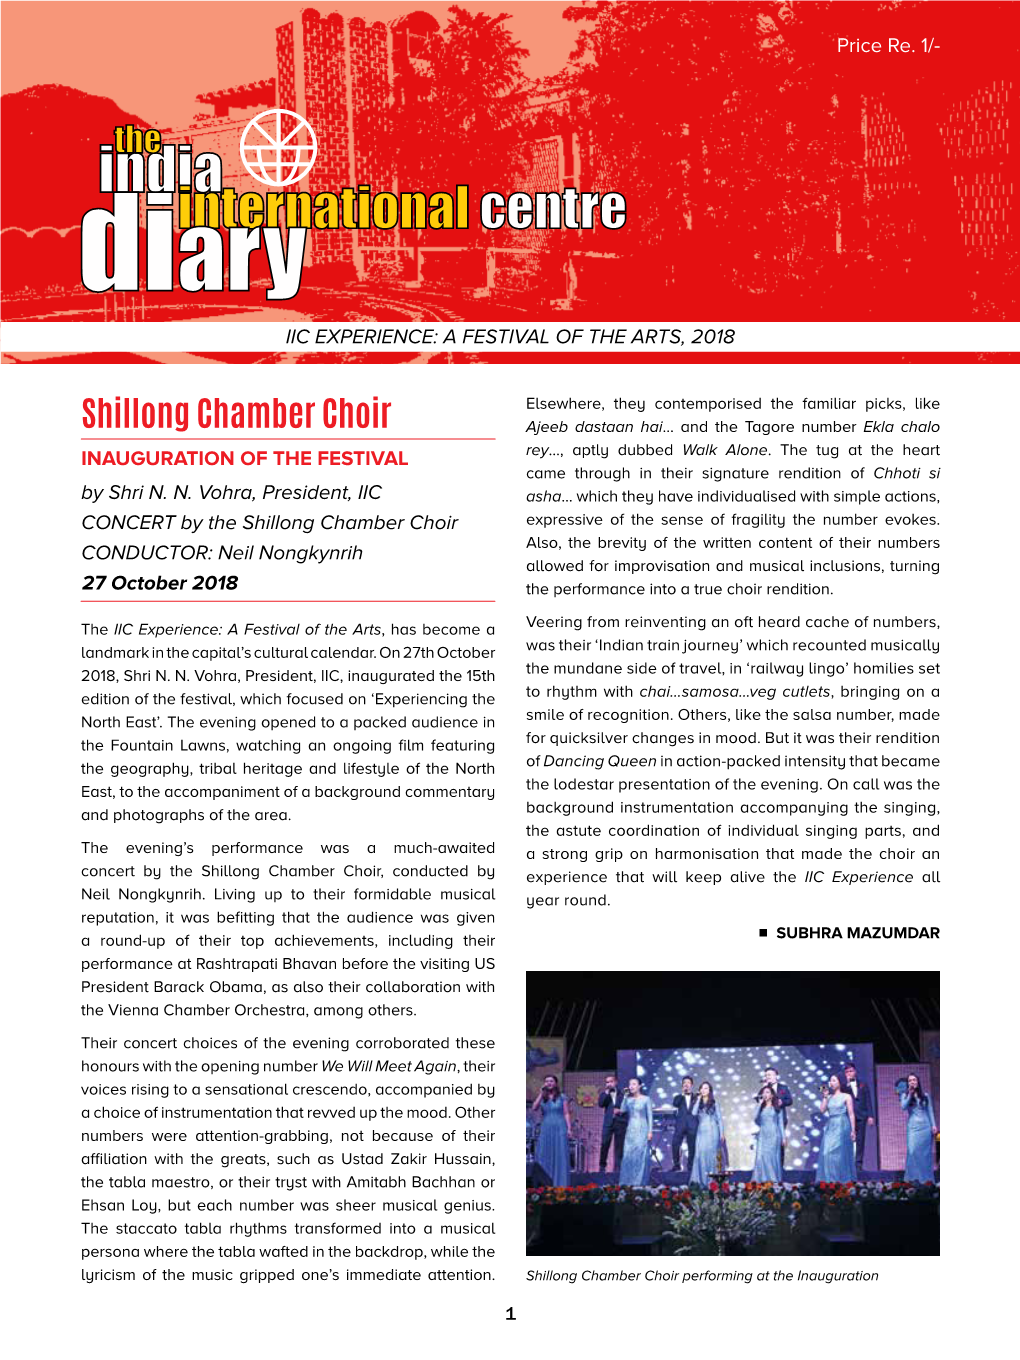 Shillong Chamber Choir Ajeeb Dastaan Hai… and the Tagore Number Ekla Chalo INAUGURATION of the FESTIVAL Rey…, Aptly Dubbed Walk Alone